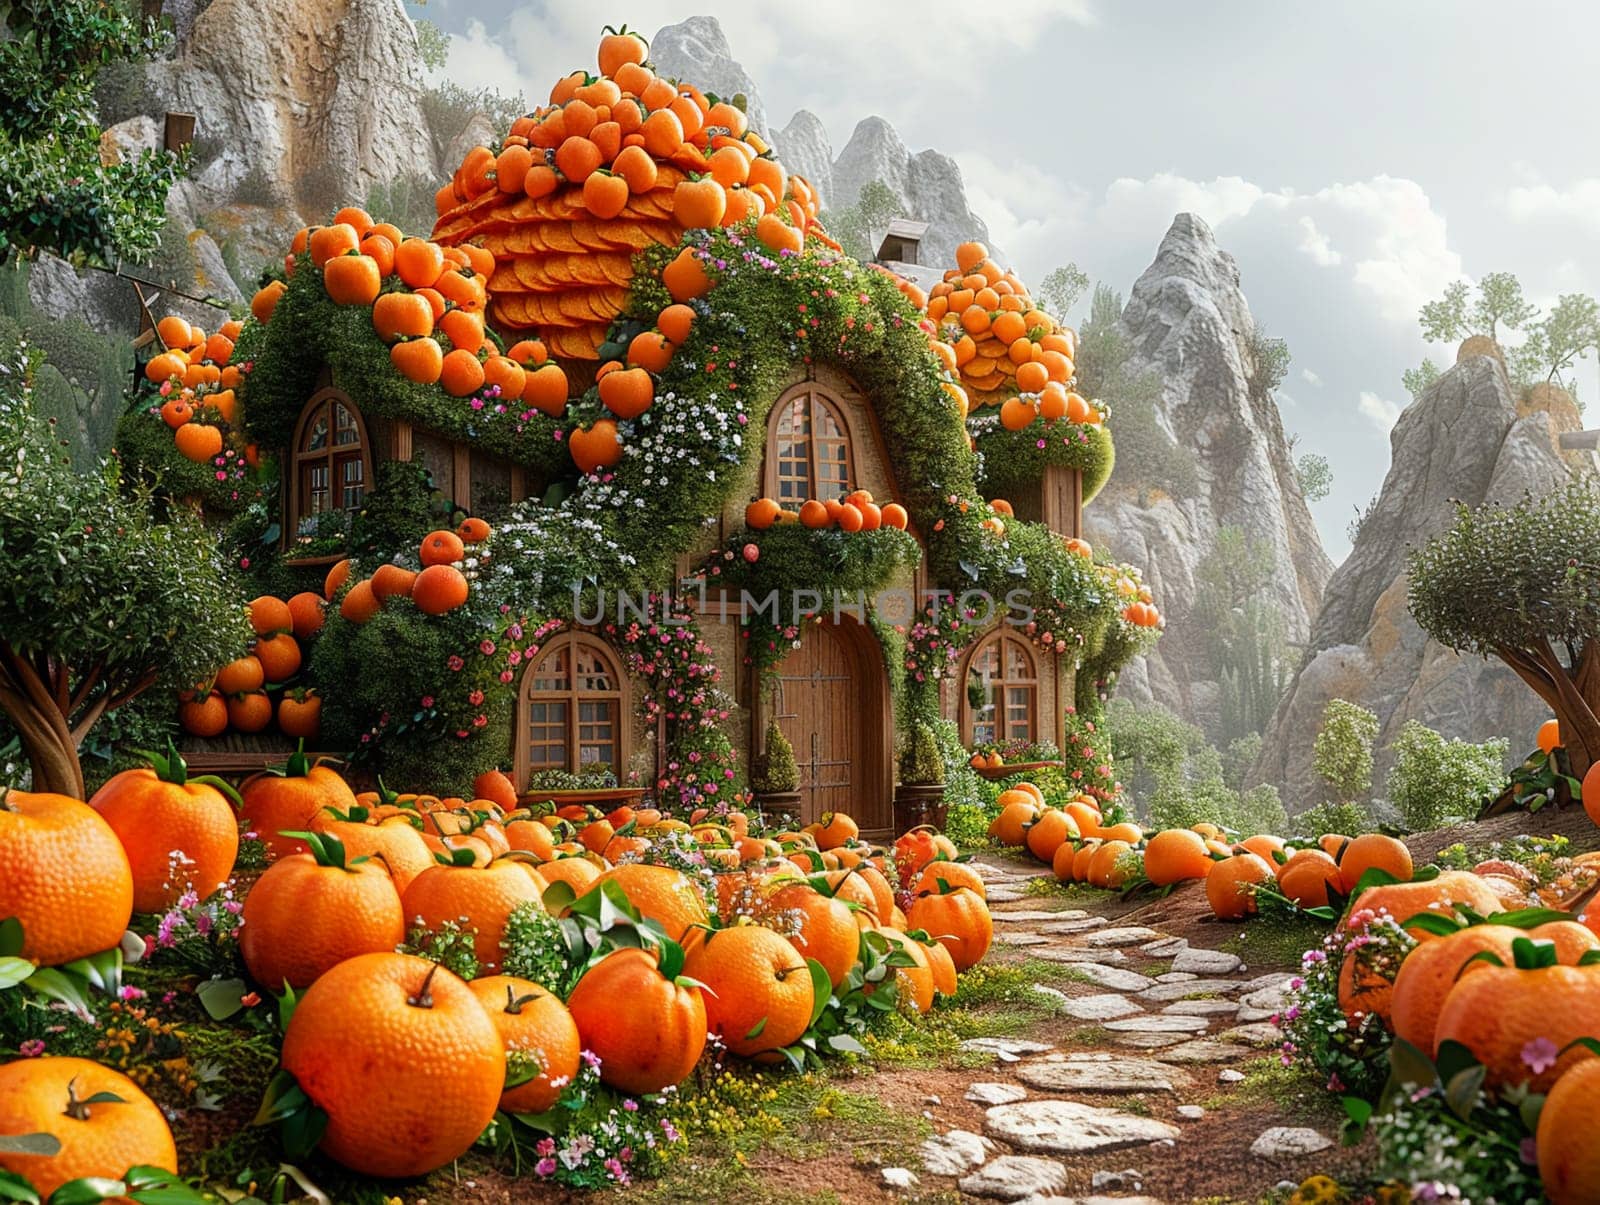 Food-inspired fantasy landscape, creative elements making up a deliciously imaginative world.